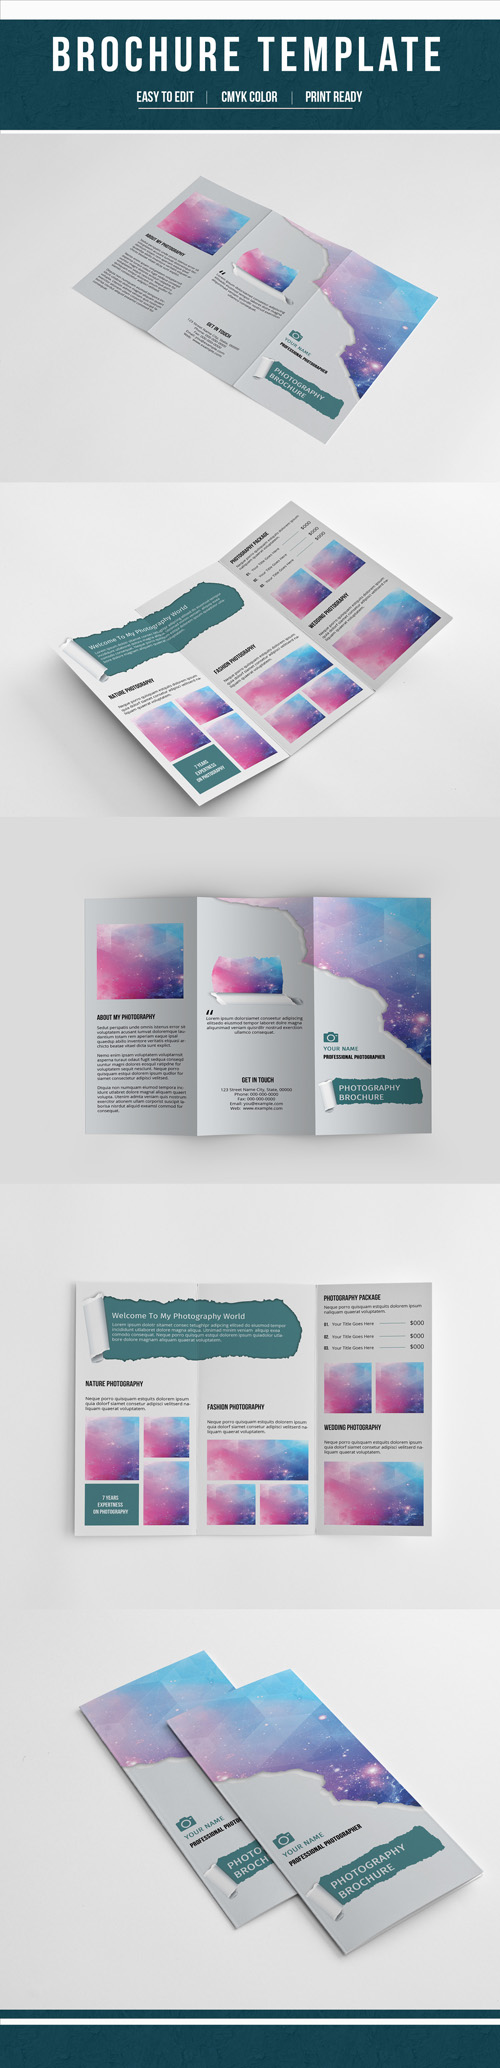 AdobeStock Trifold Brochure Layout with Paper Tear Element 4 189528172